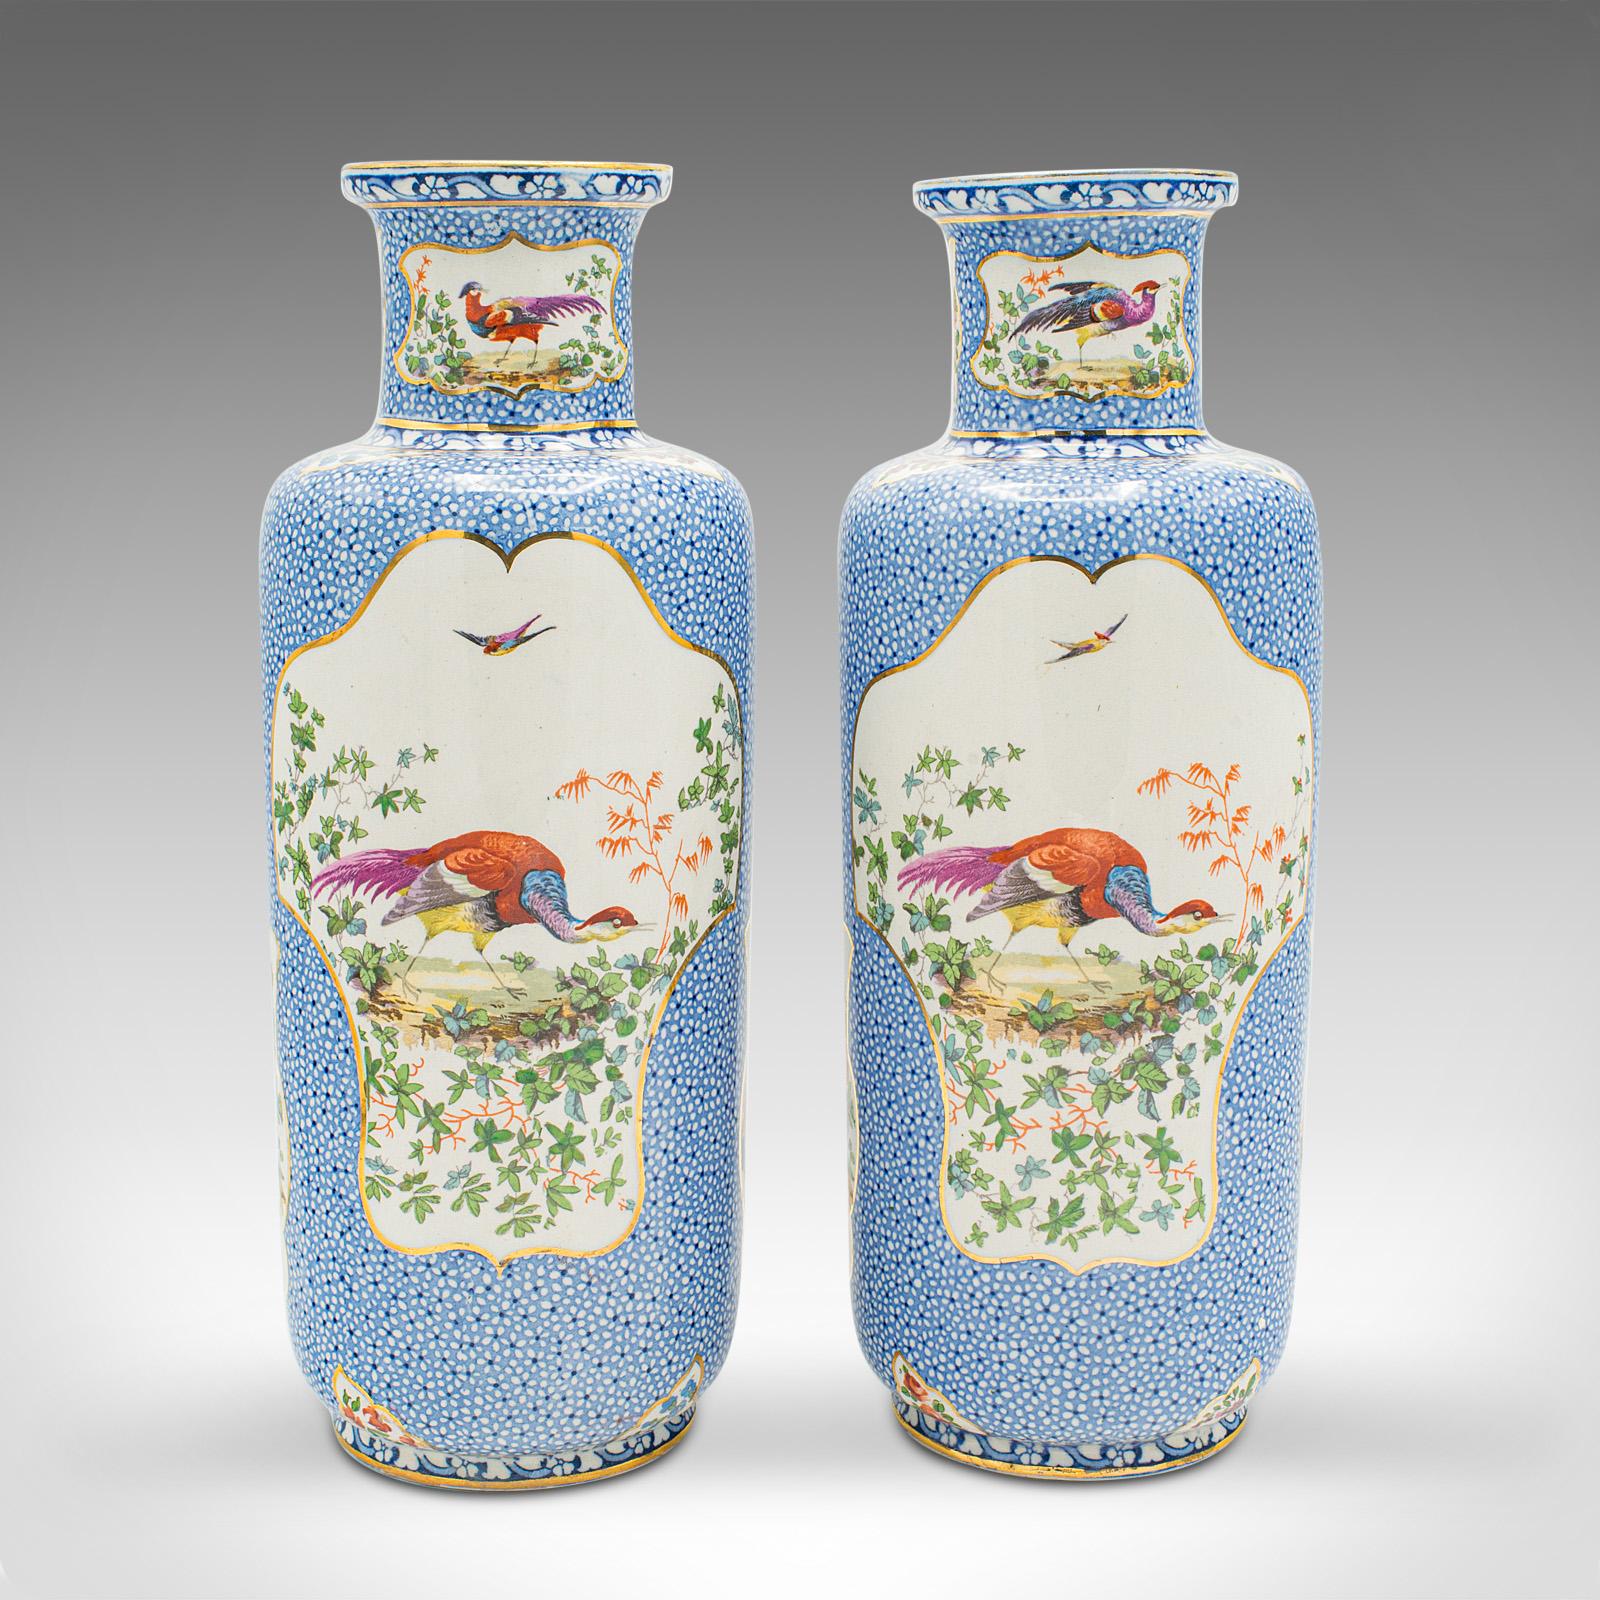 This is a pair of antique decorative stem vases. An English ceramic flower sleeve, dating to the Edwardian period, circa 1910.

Profusely decorated vases boasting fine colour and animal interest
Displays a desirable aged patina and in good